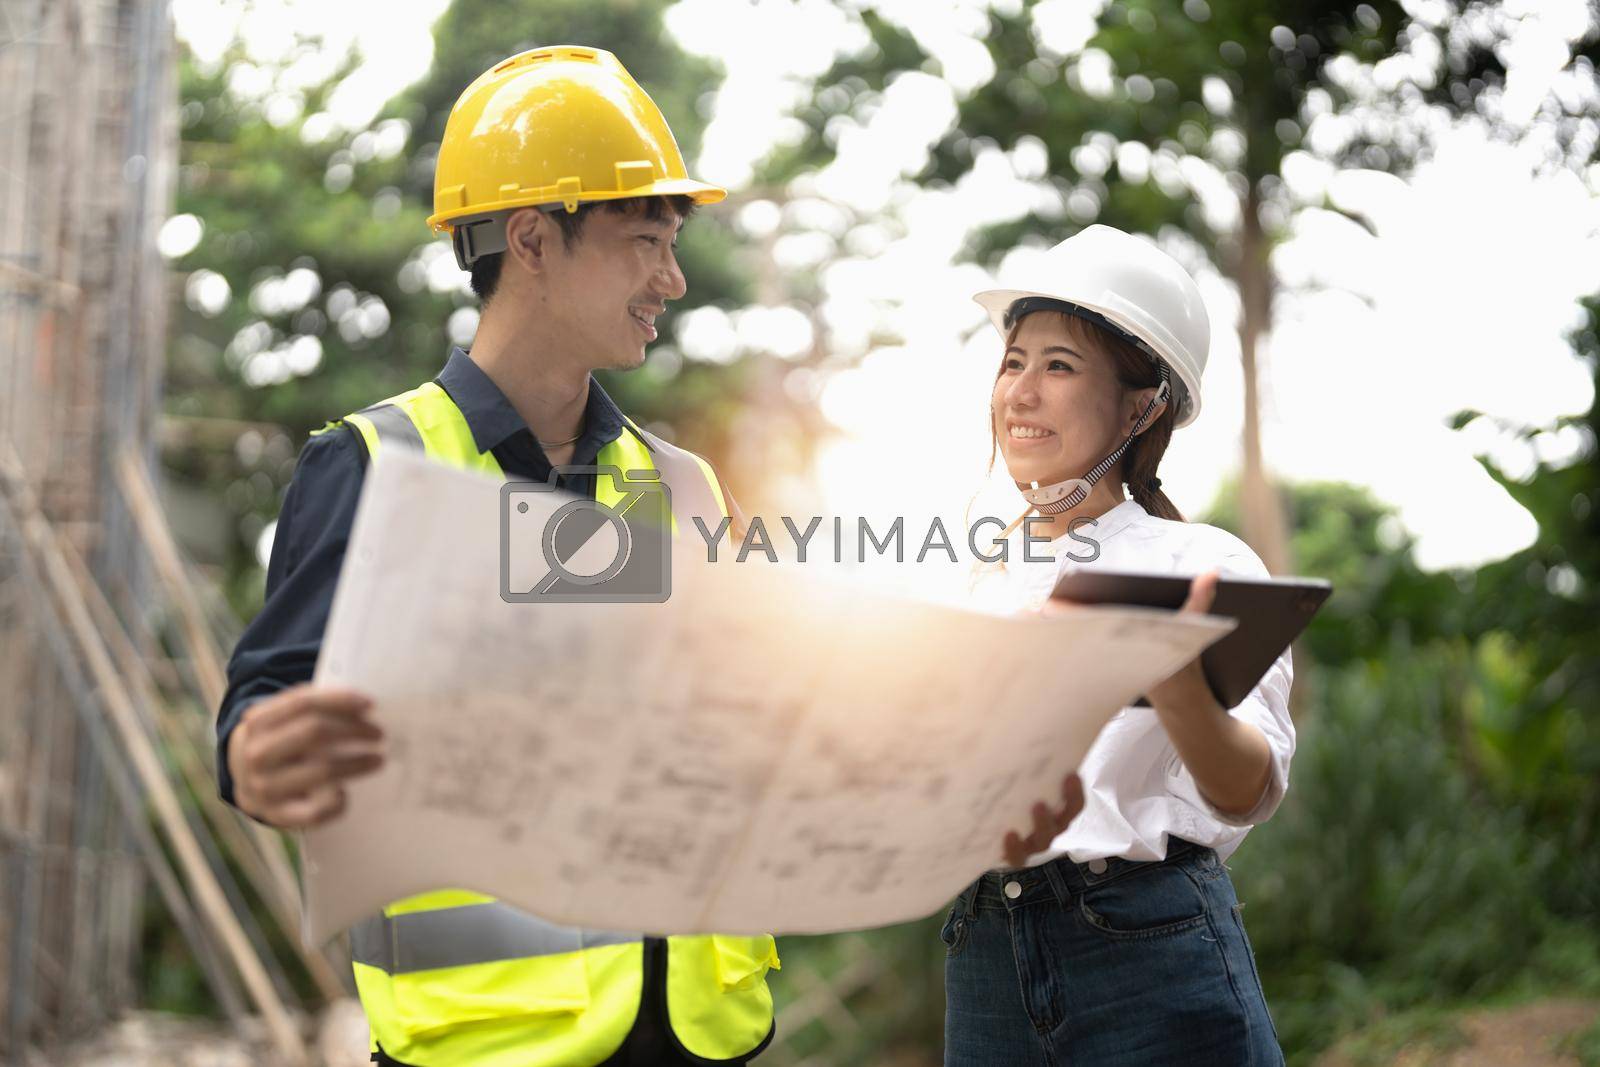 Royalty free image of engineering and construction managers discussing project blue print on the table at construction site by nateemee